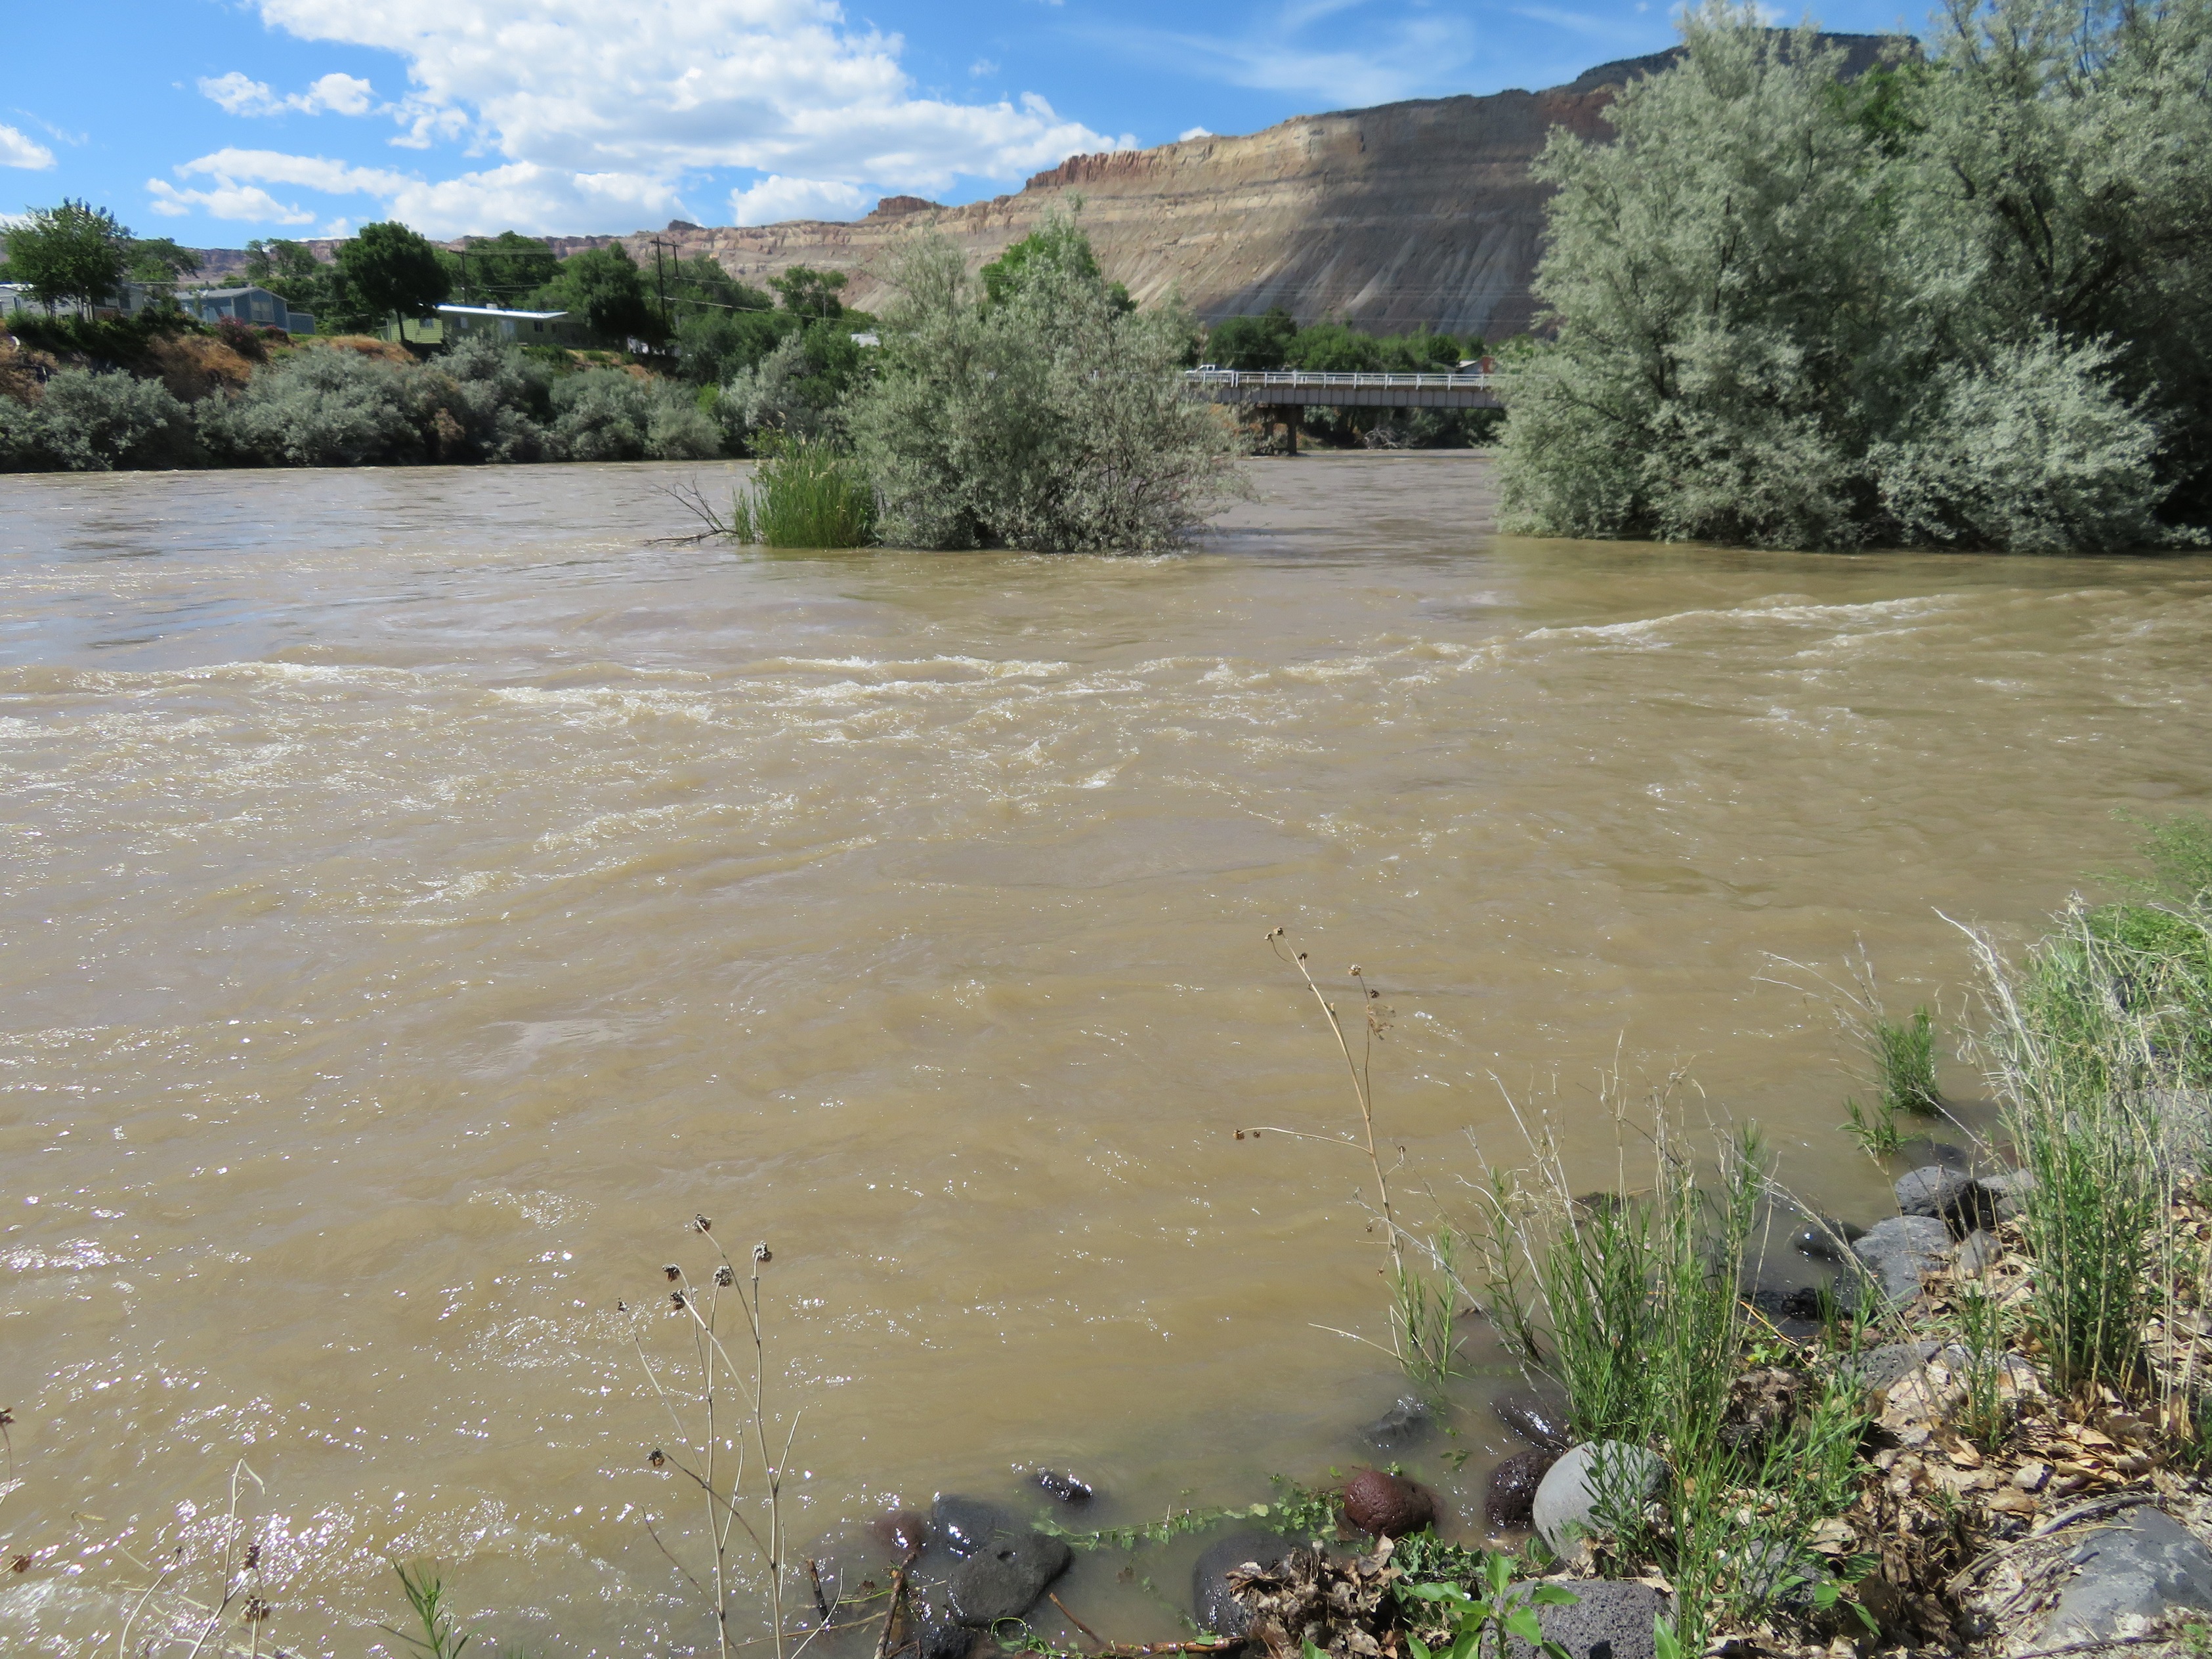 This picture shows water up to the Colorado River running fast near Palisade.